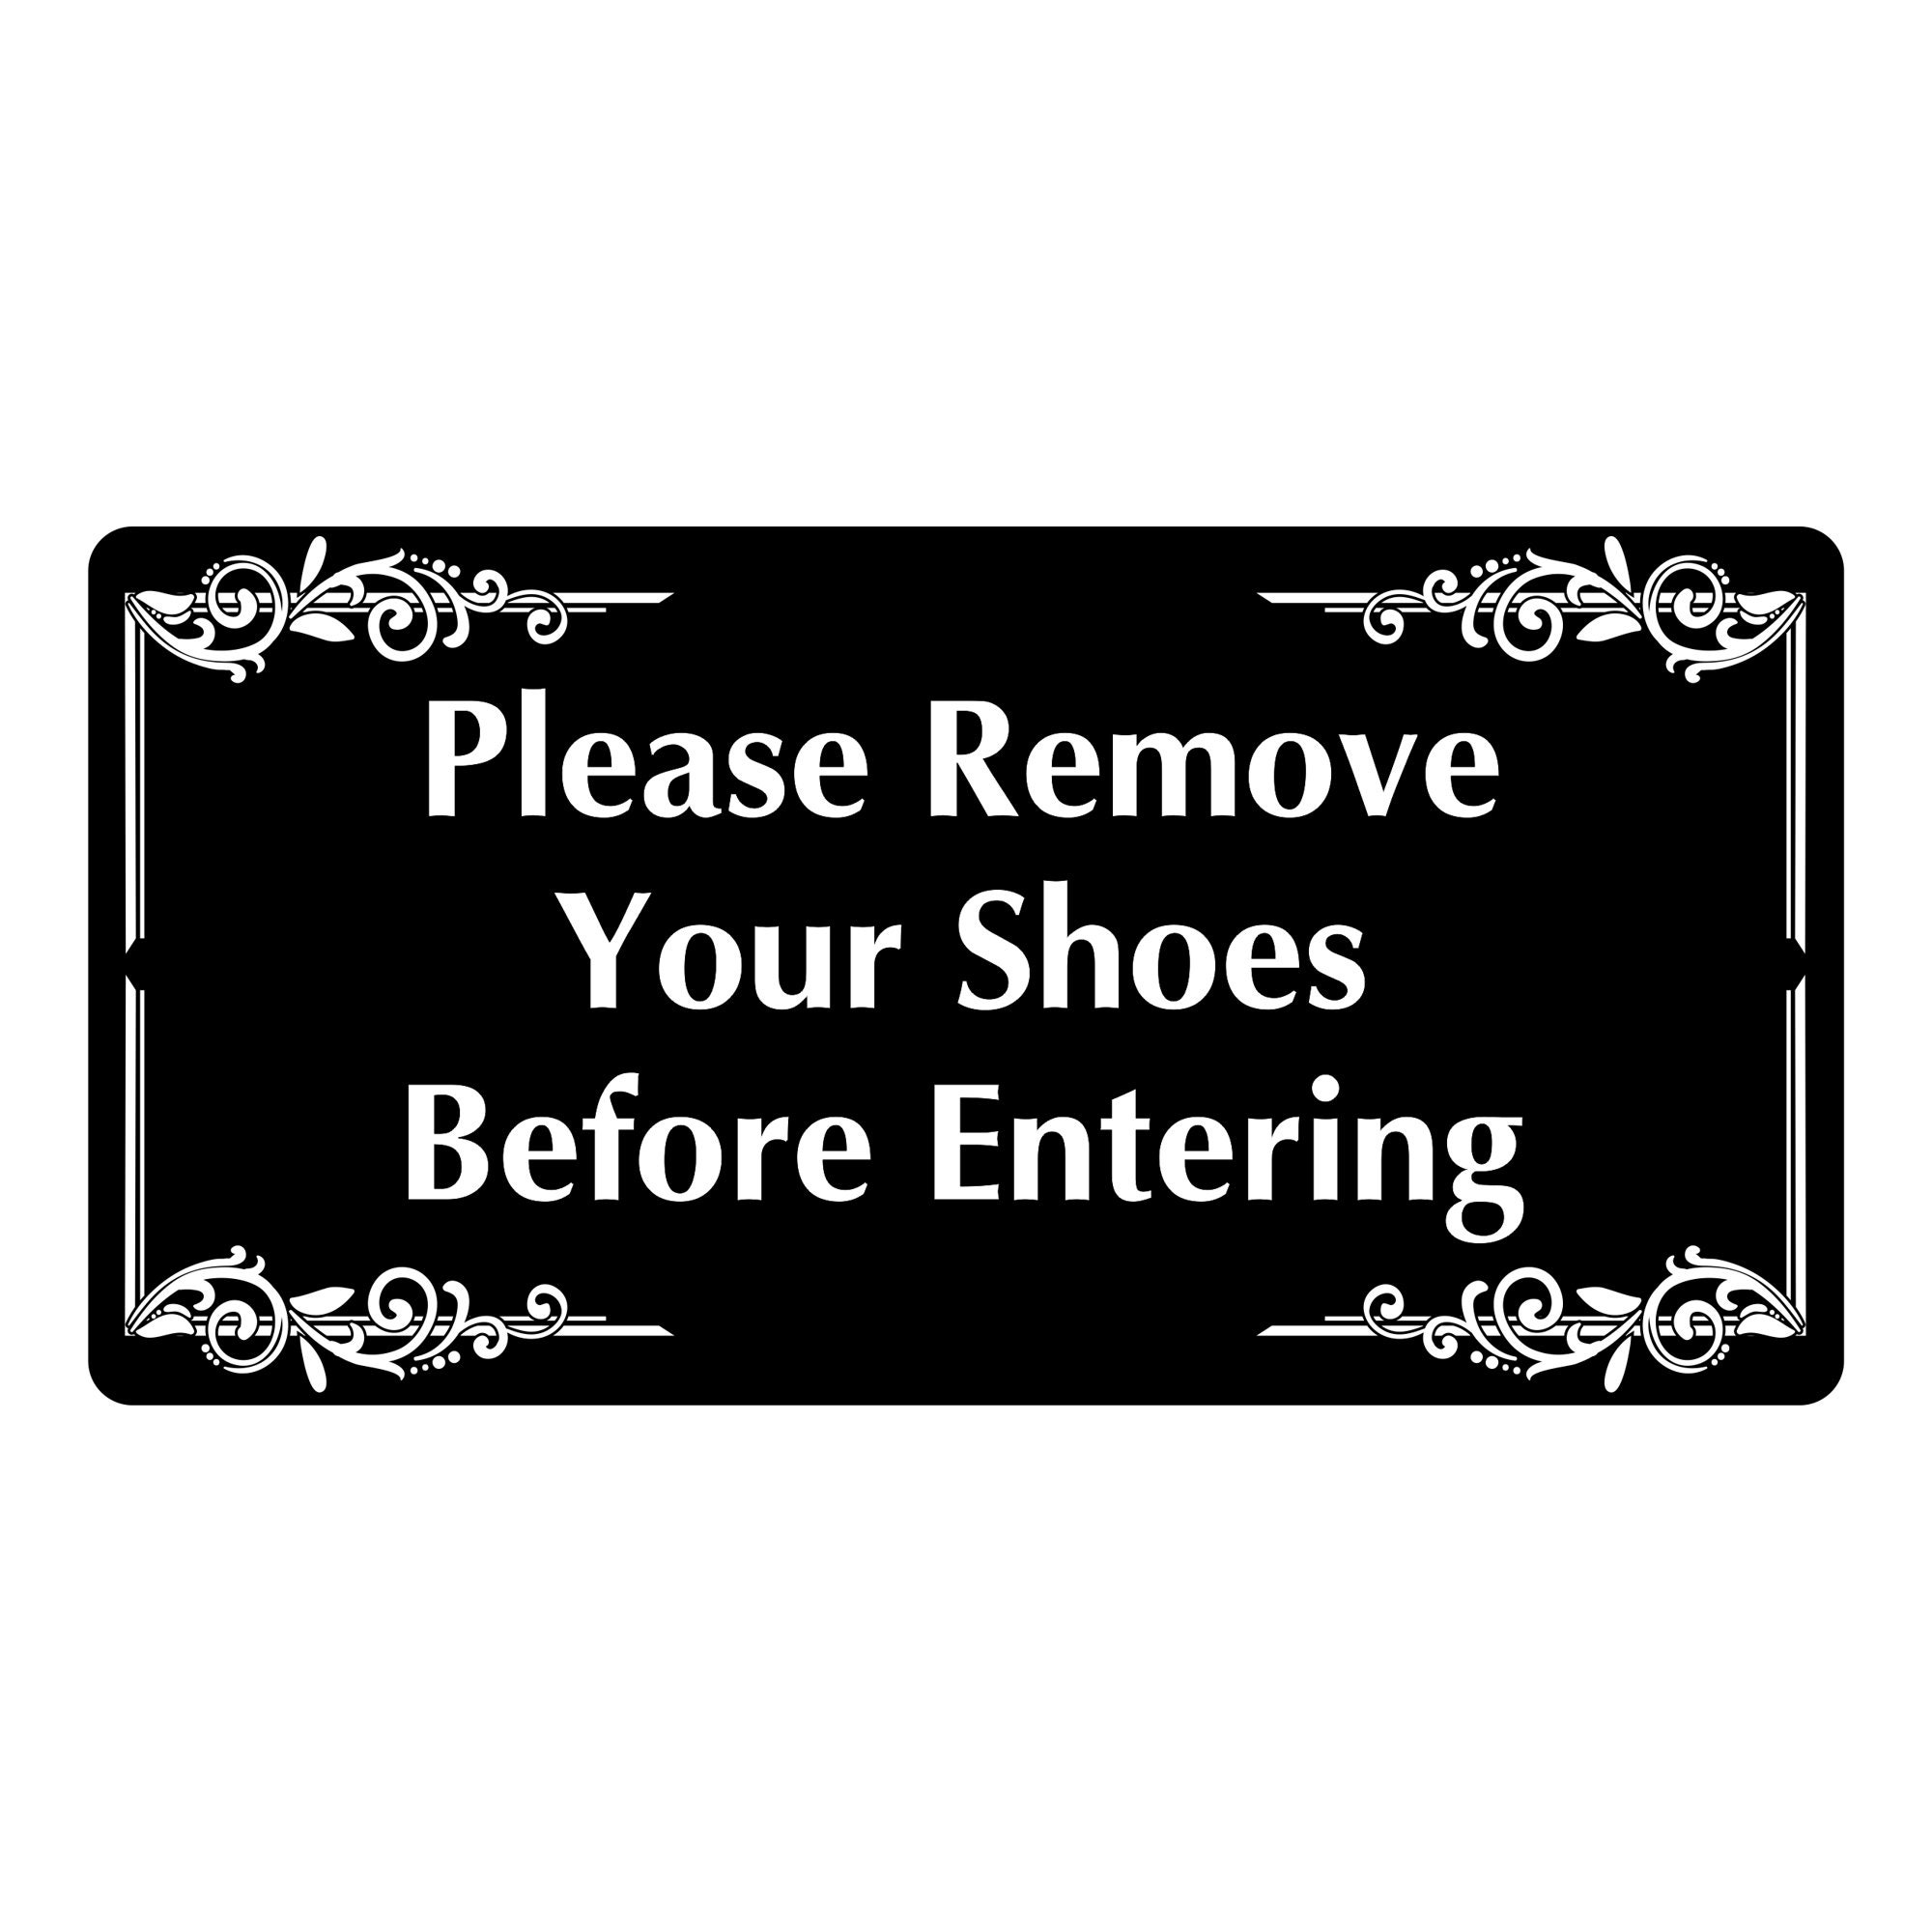 Shoes Footwear Allowed Remove Shoes Door Sign Notice Enter Stock Vector by  ©mnaleen.gmail.com 379929696